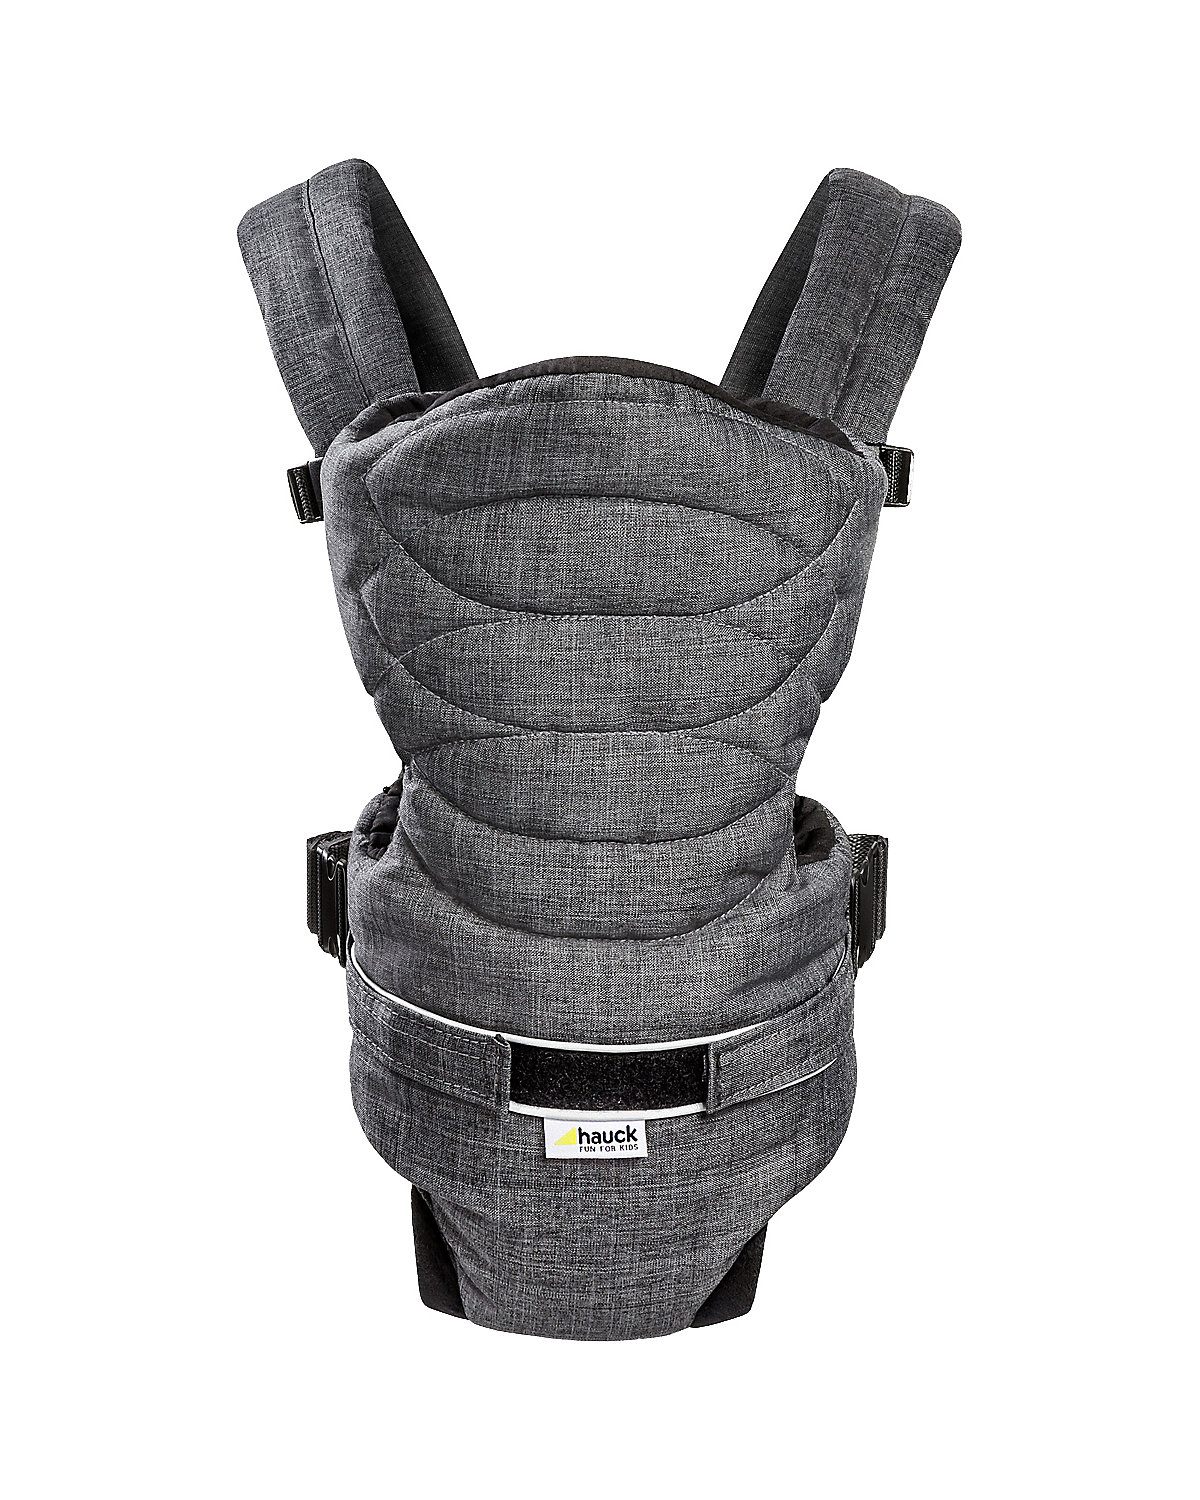 hauck Babytrage 2-Way Carrier Malange Charcoal